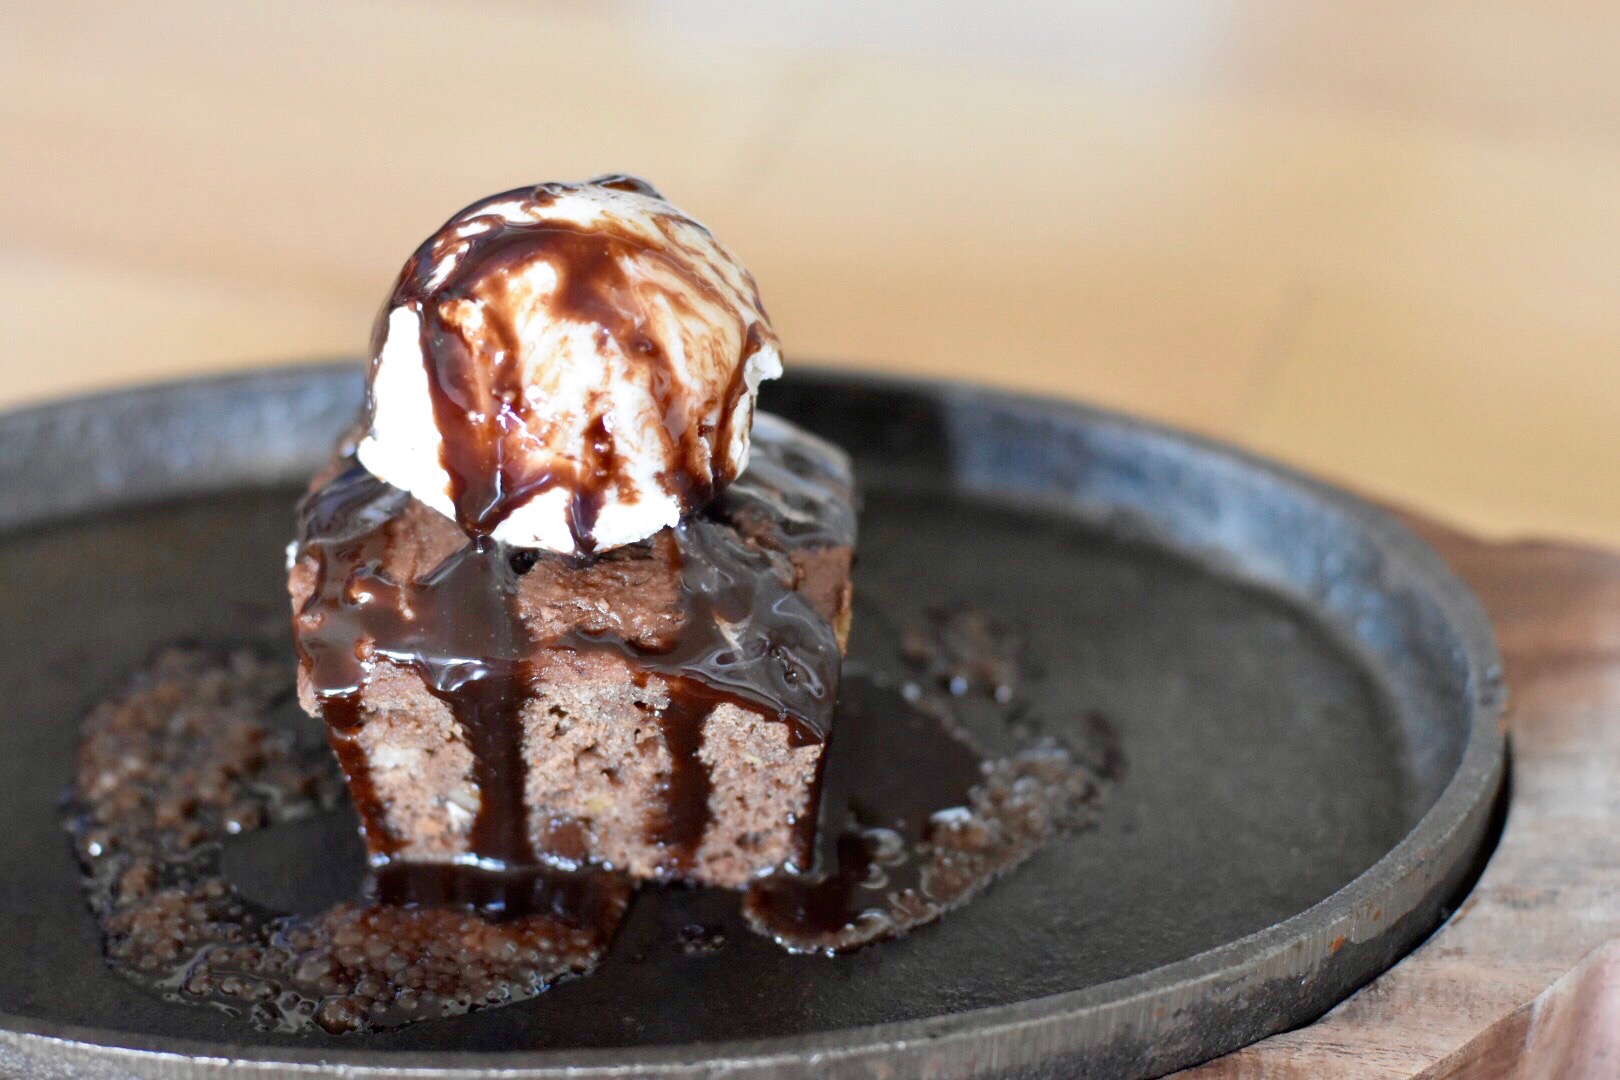 Sizzling Brownie with ice cream / Weight Watchers Brownie